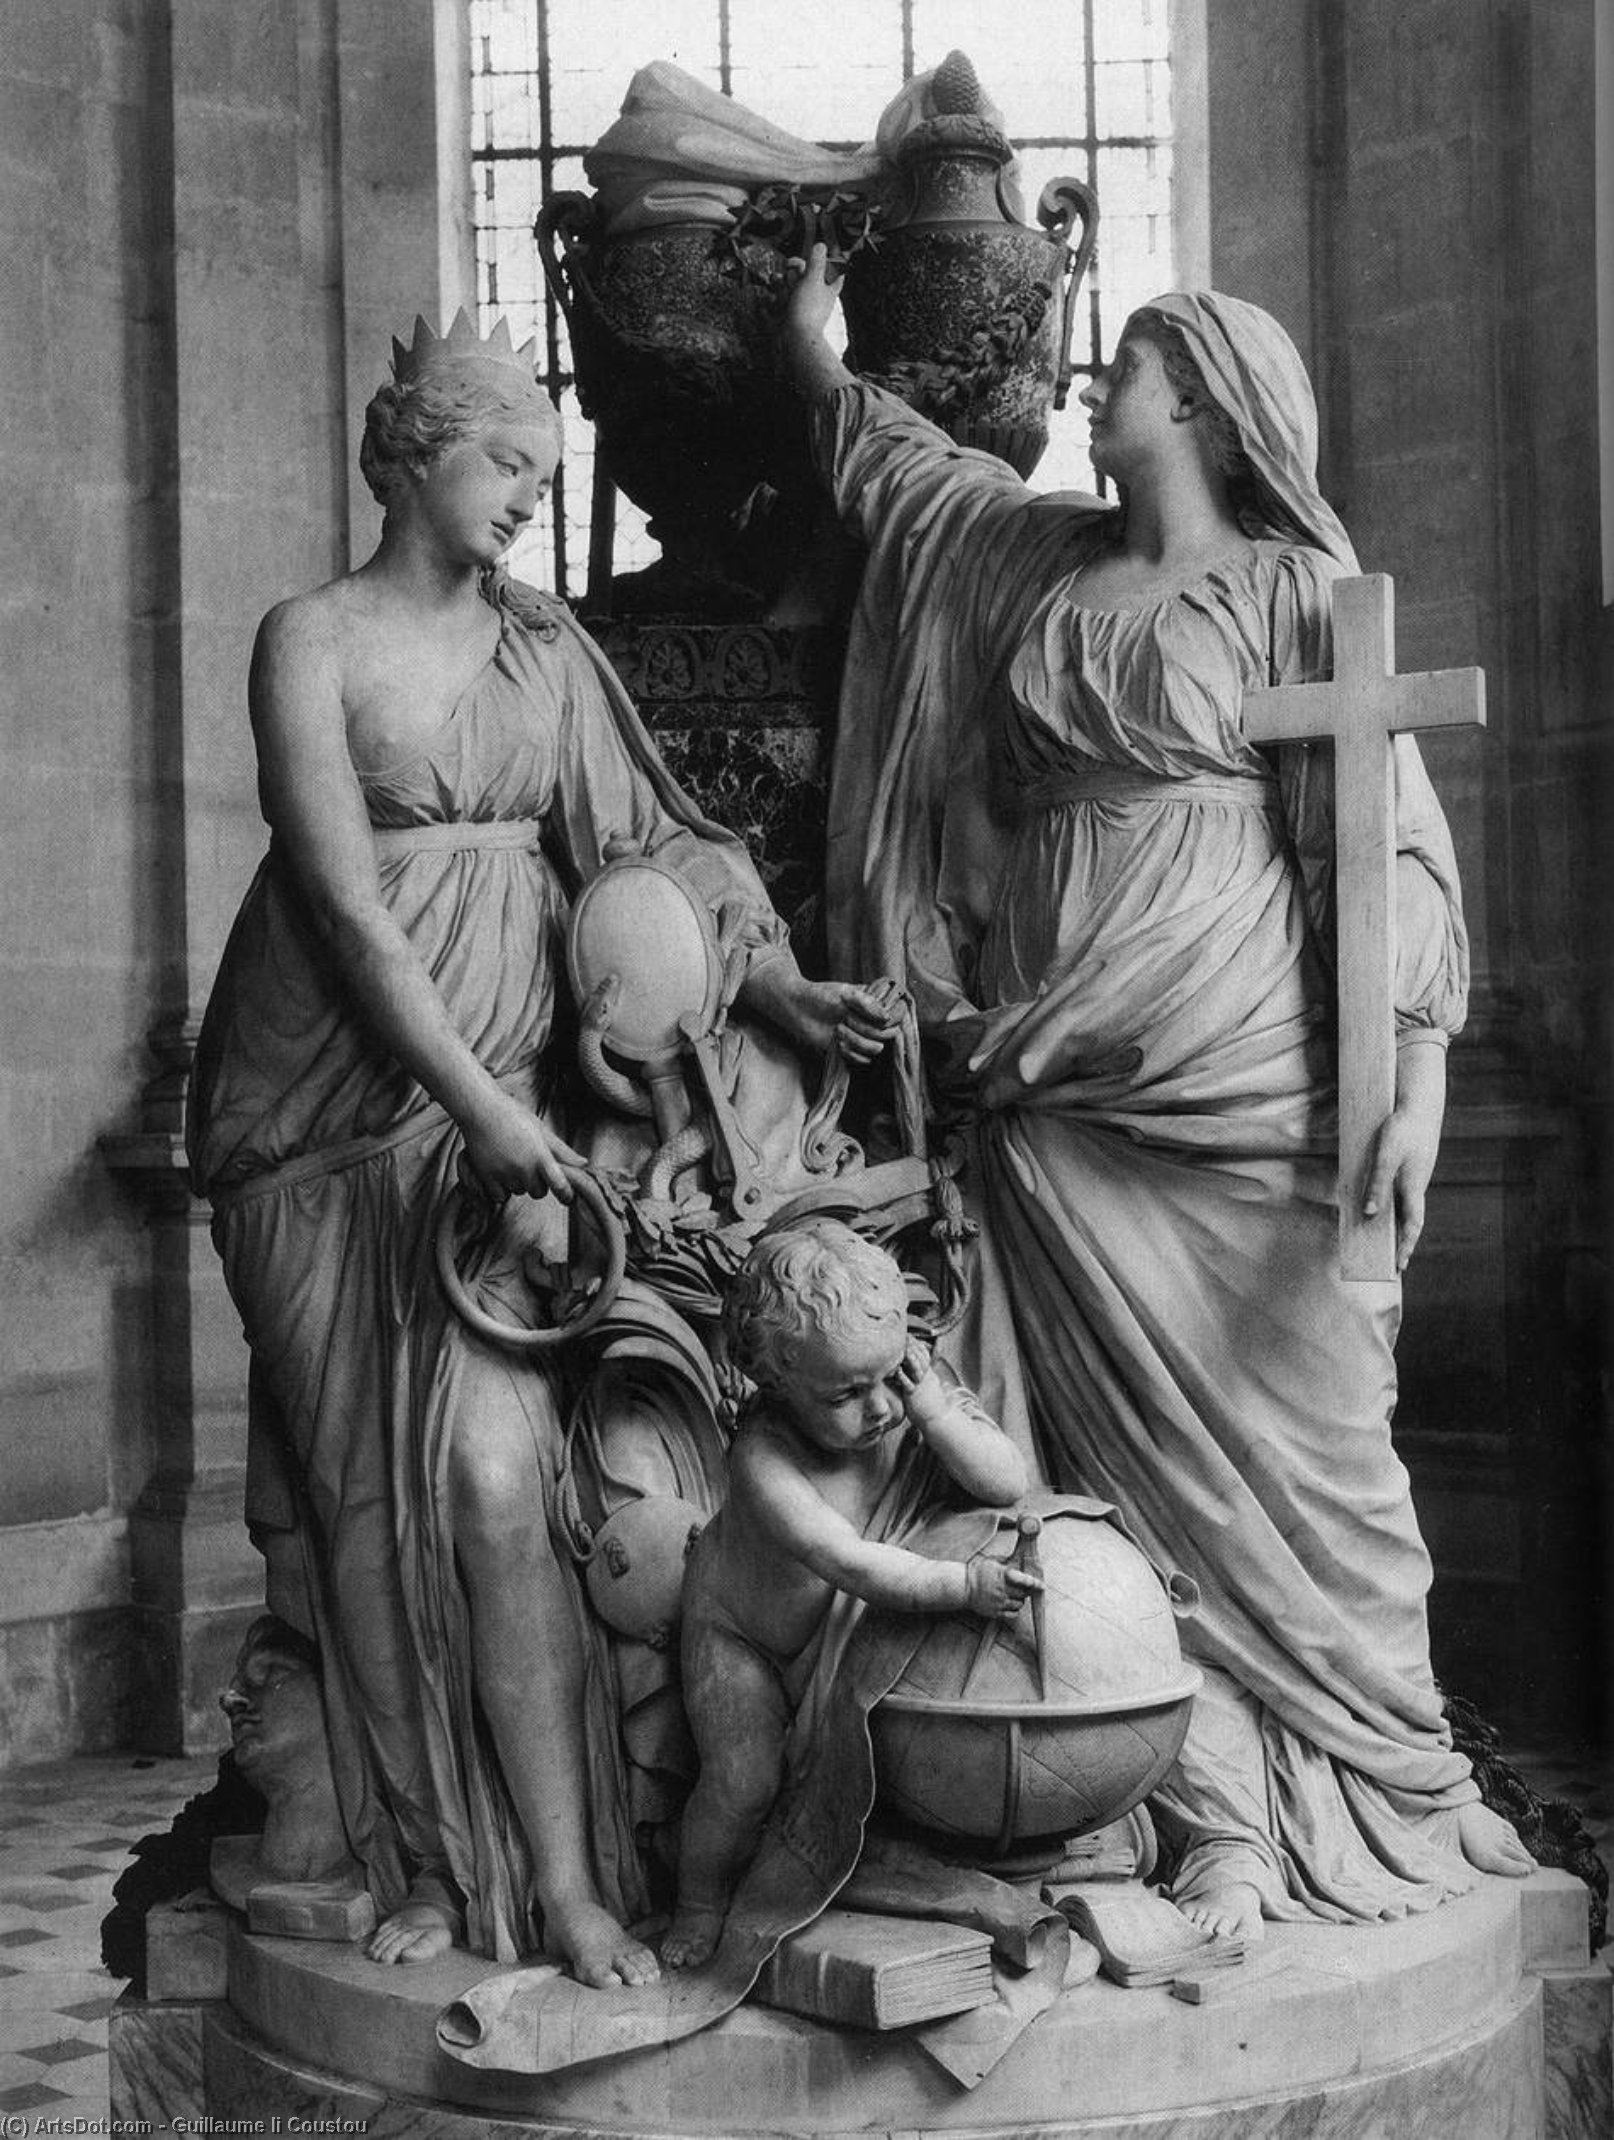 WikiOO.org - Encyclopedia of Fine Arts - Malba, Artwork Guillaume Ii Coustou - Monument to the Dauphin